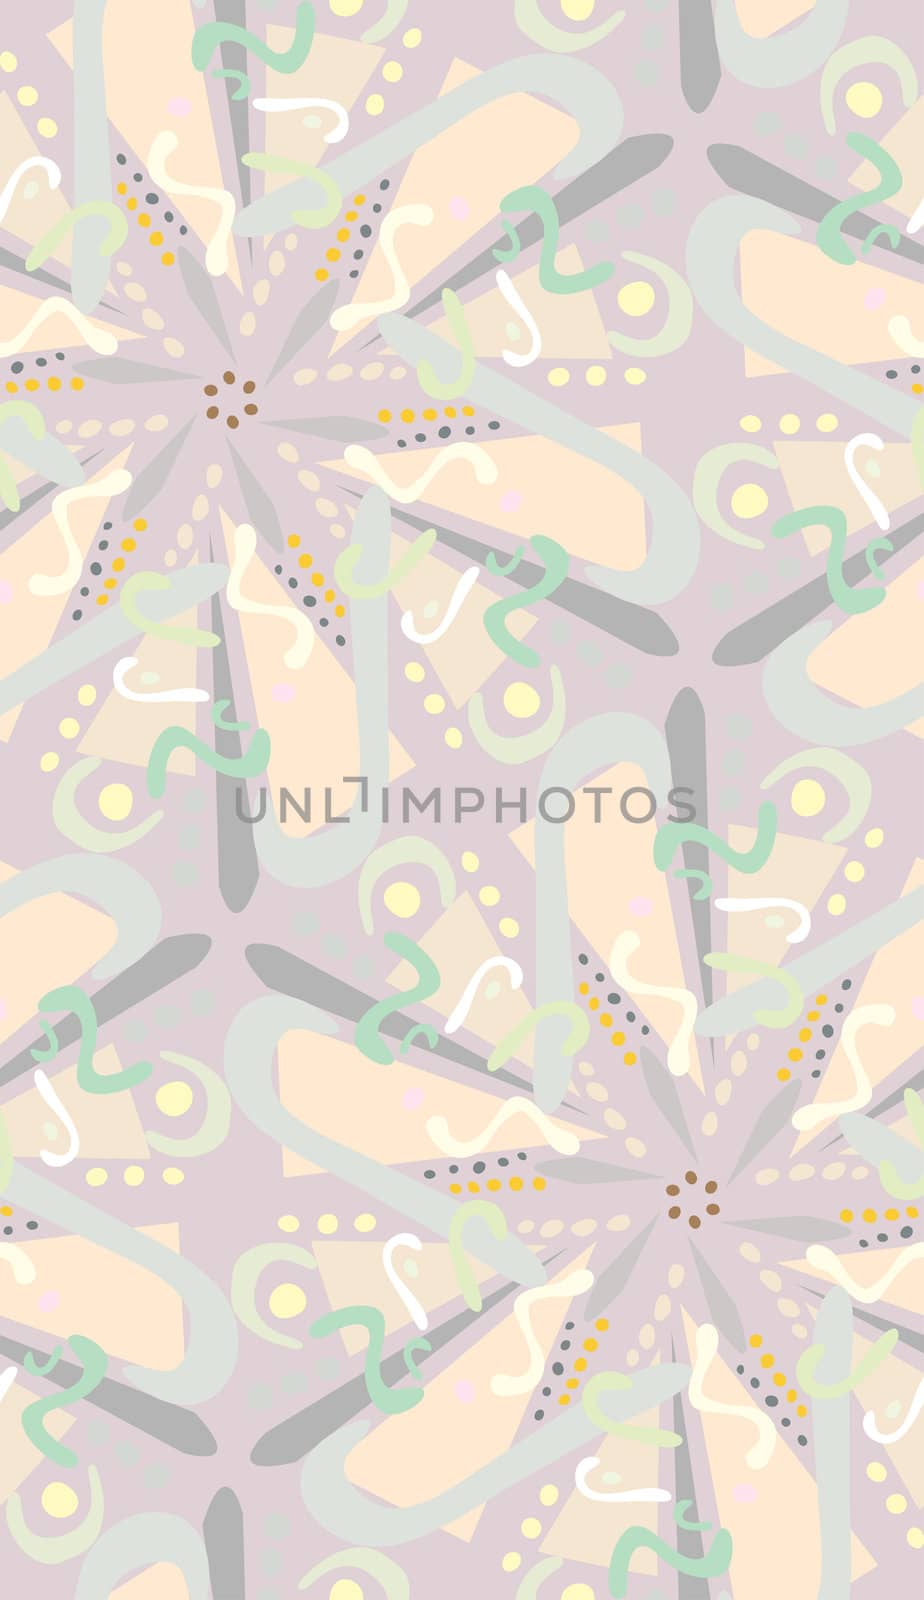 Contemporary arabesque fusion seamless background pattern in various tones